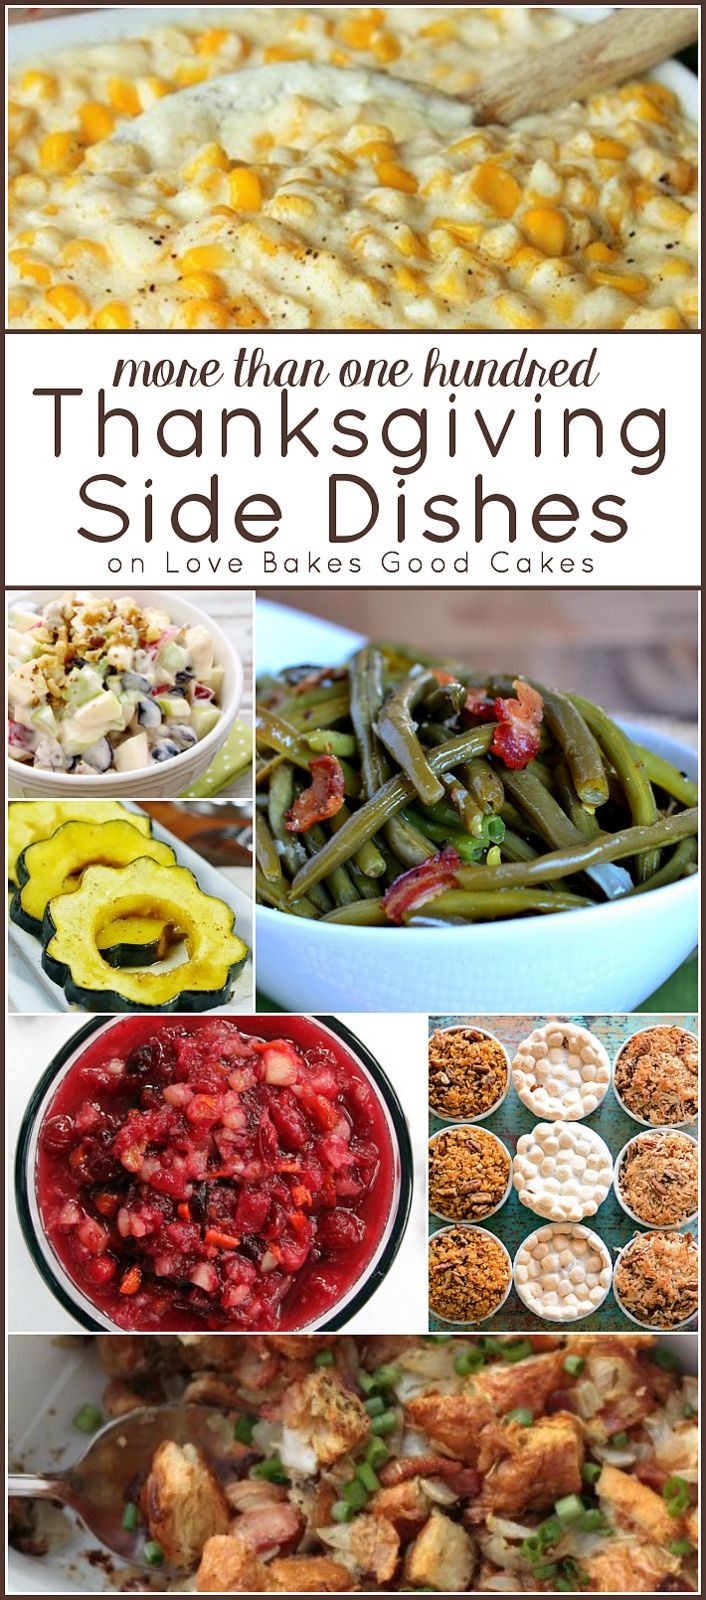 Thanksgiving Side Dishes Pinterest
 More than 100 Thanksgiving Side Dishes There s something